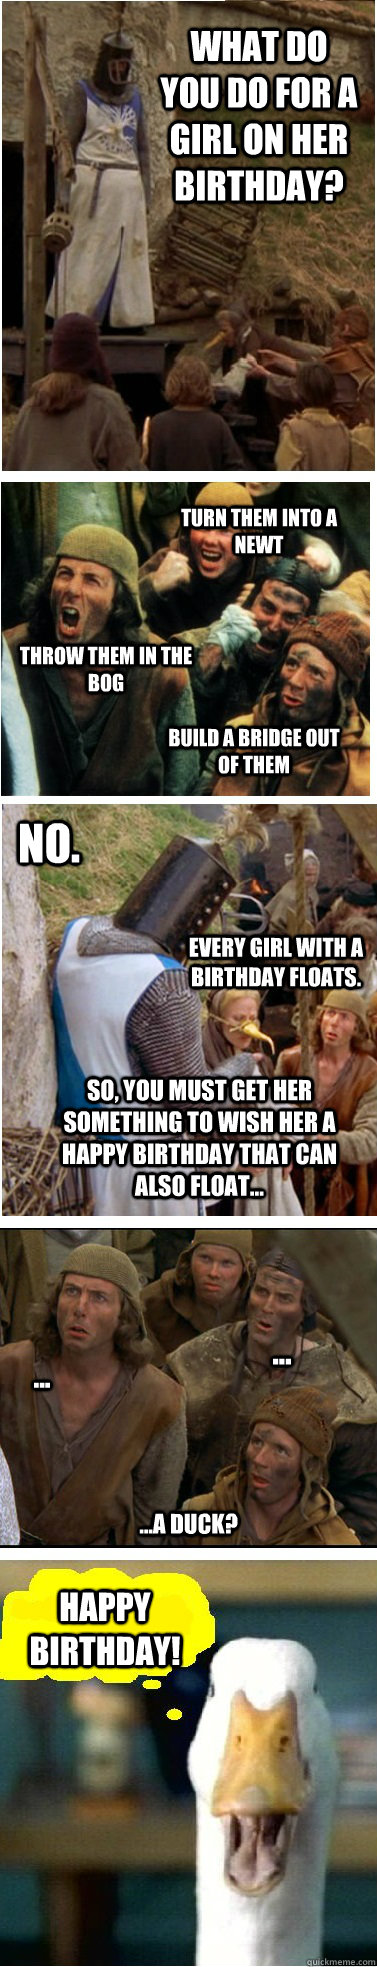 What do you do for a girl on her birthday? build a bridge out of them Throw them in the bog Turn them into a newt No.  Every girl with a birthday floats.  So, you must get her something to wish her a happy birthday that can also float... ...a duck? Happy   Monty Python Holy grail birthday